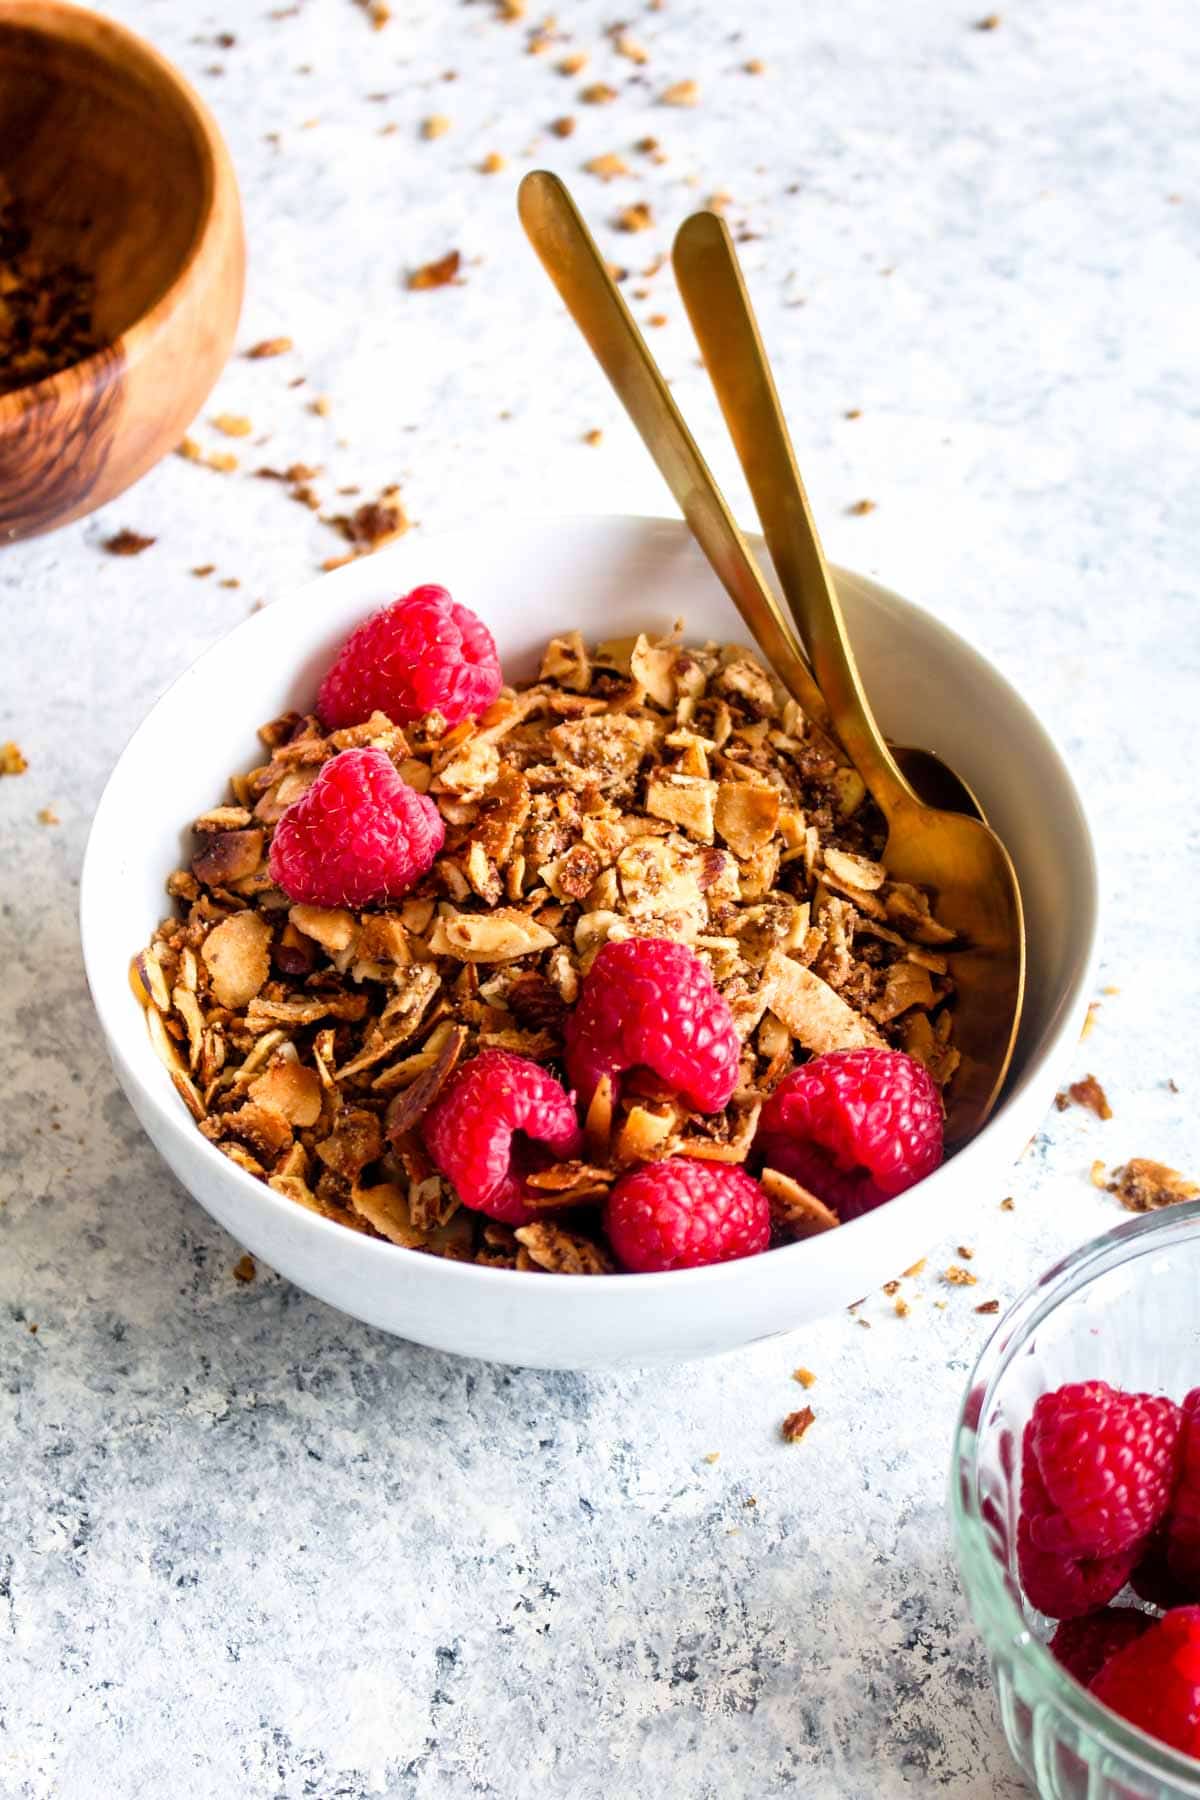 Paleo Coconut Almond Granola is a 20 minute breakfast recipe that is so good, it will make you into a morning person! 8 healthy ingredients are all you need for this easy, grain-free, and vegan recipe. Use it to top yogurt and smoothies at brunch, or eat it as a cereal. | CatcingSeeds.com